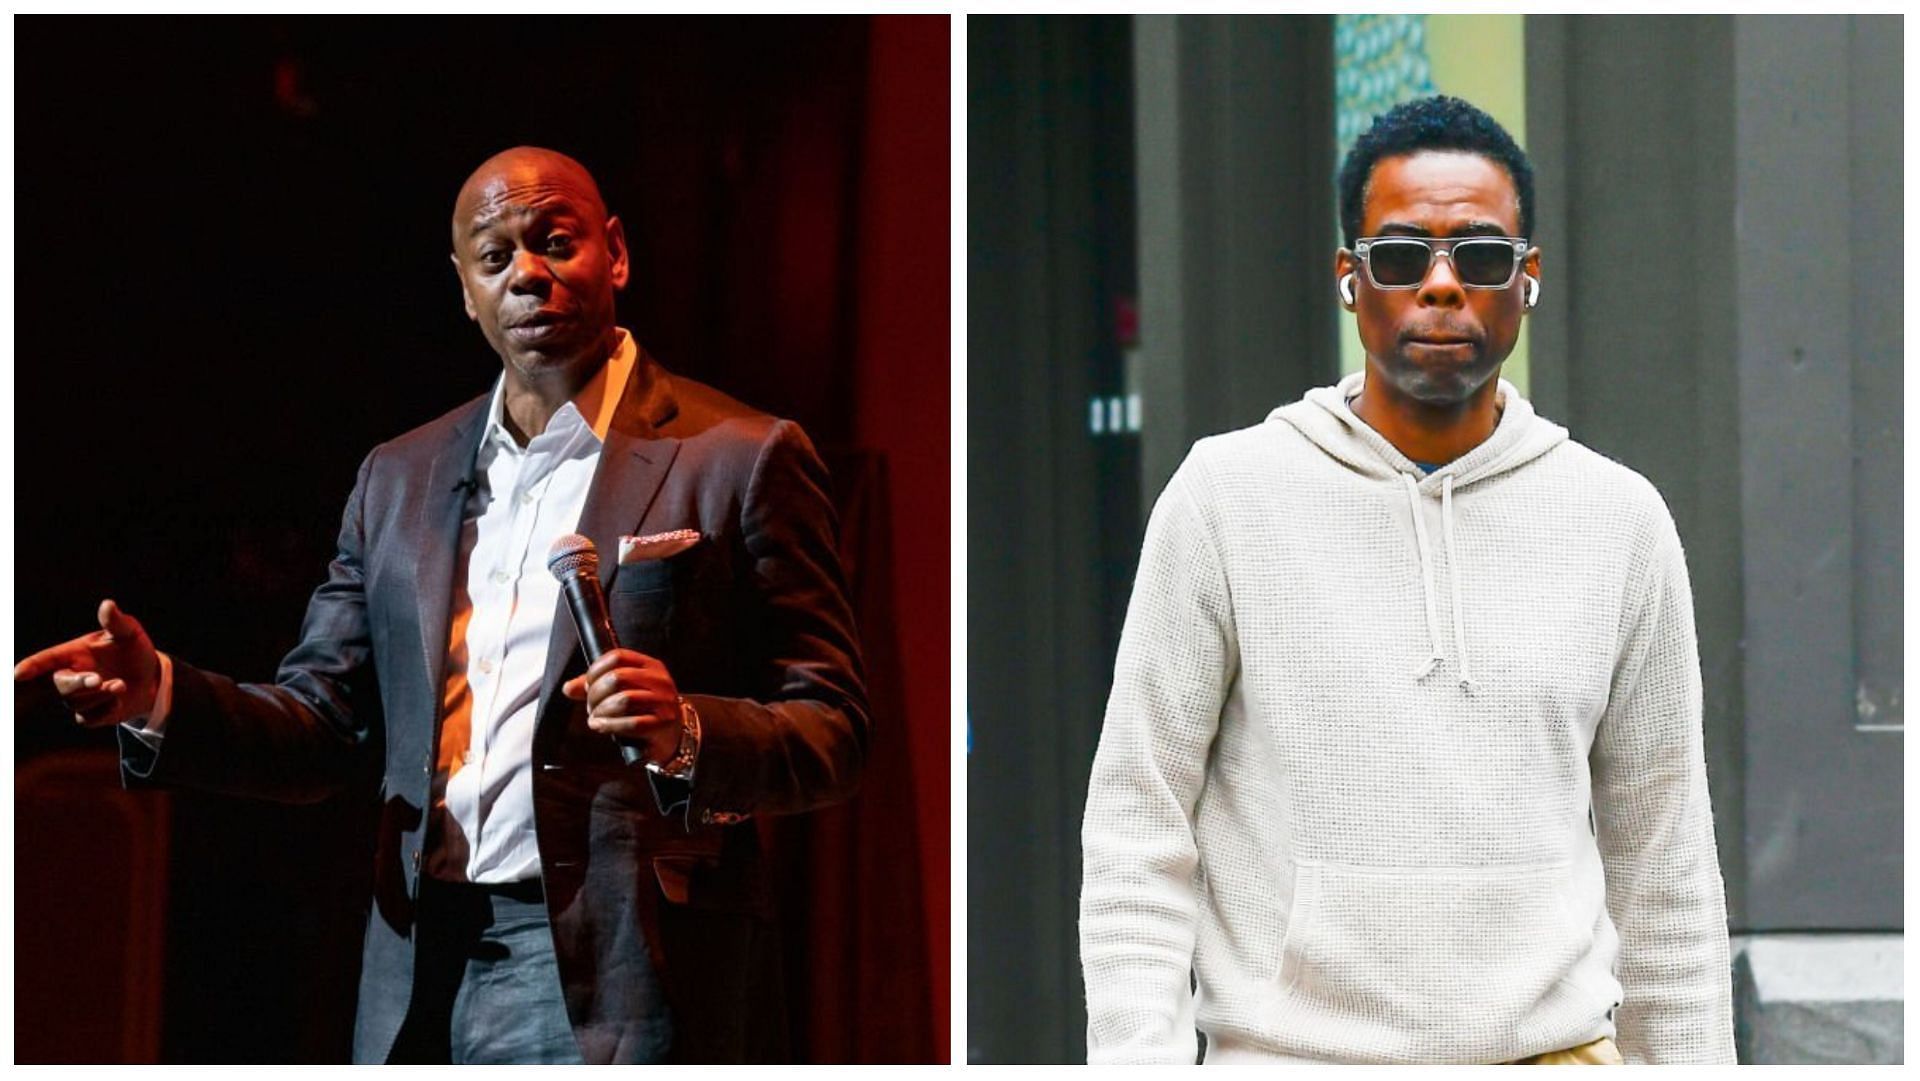 Dave Chappelle and Chris Rock referenced to the Oscars 2022 incident in their recent performance (Images via Amanda Andrade-Rhoades and Raymond Hall/Getty Images)